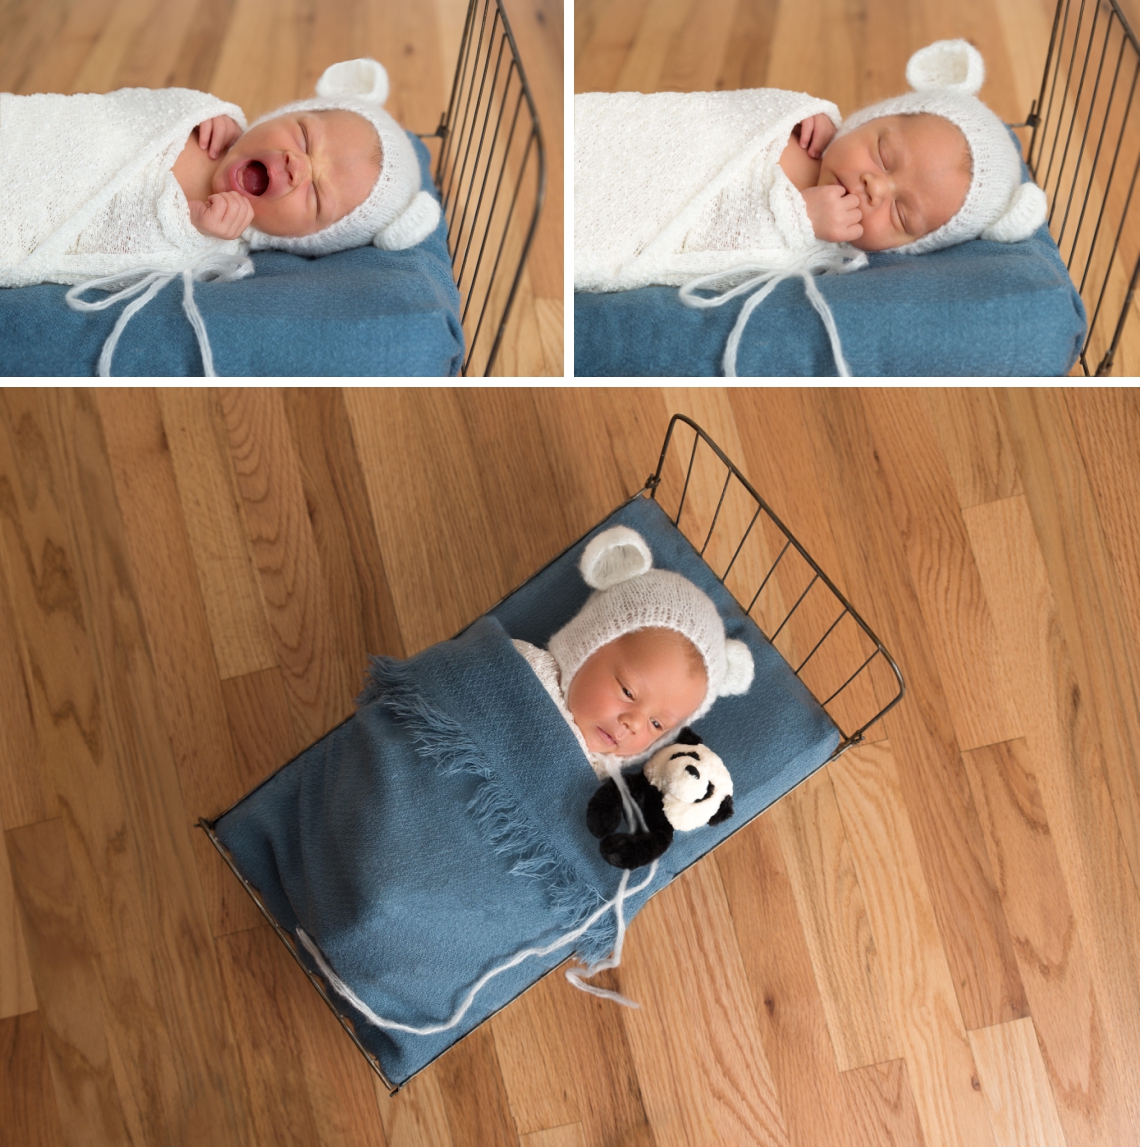 TFJ Designs wire newborn bed prop, Newborn with a white bear hat in a small bed